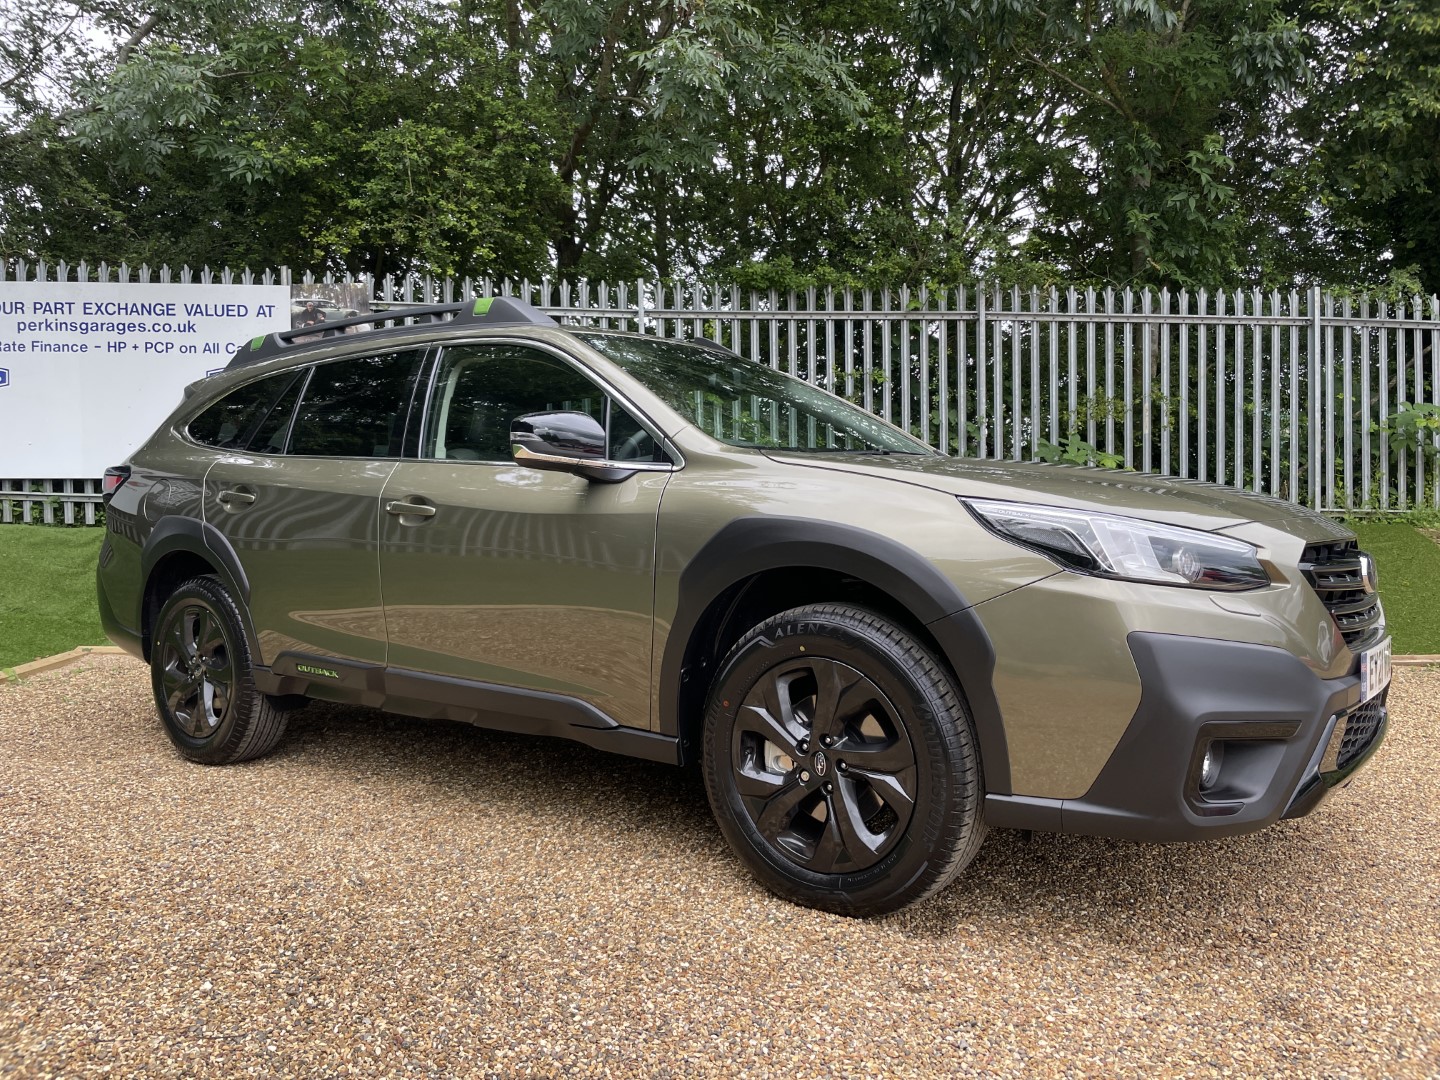 Test Drive the New Subaru Outback today Essex